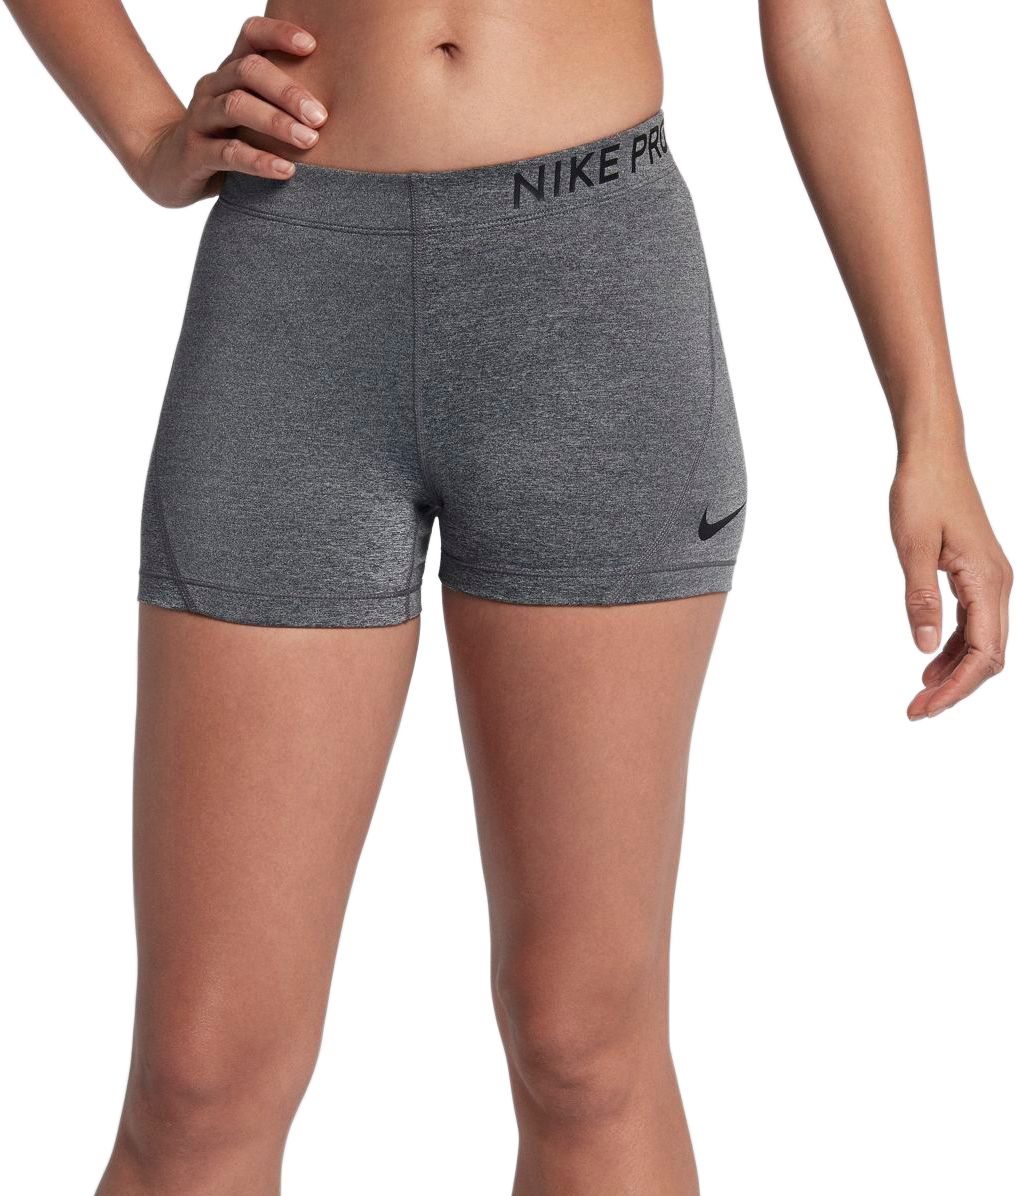 the nike pro tight fit shorts